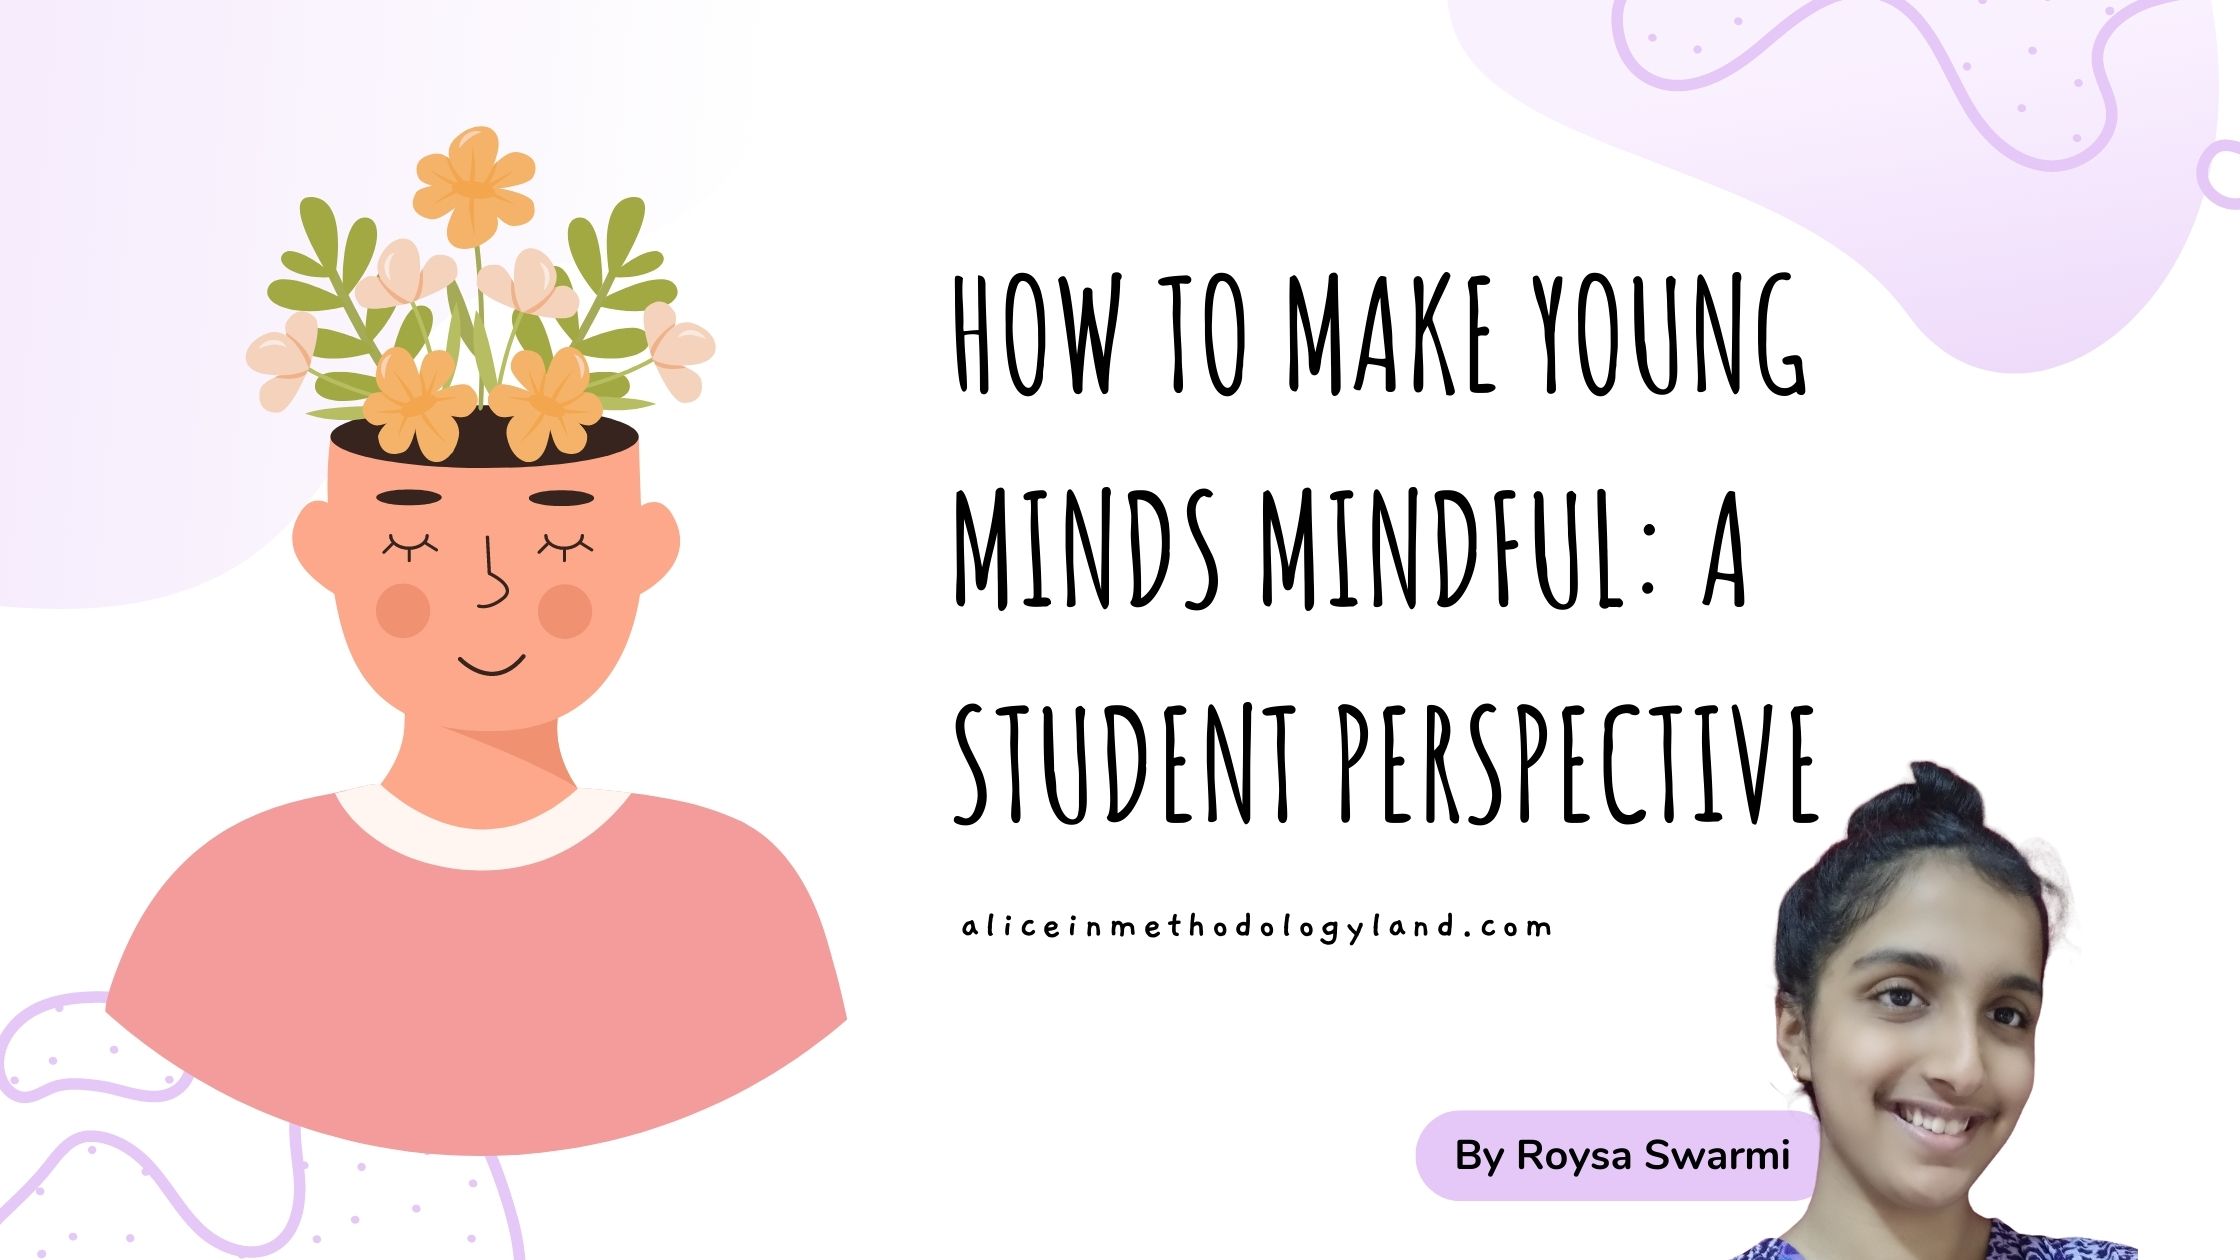 How to Make Young Minds Mindful: A Student Perspective